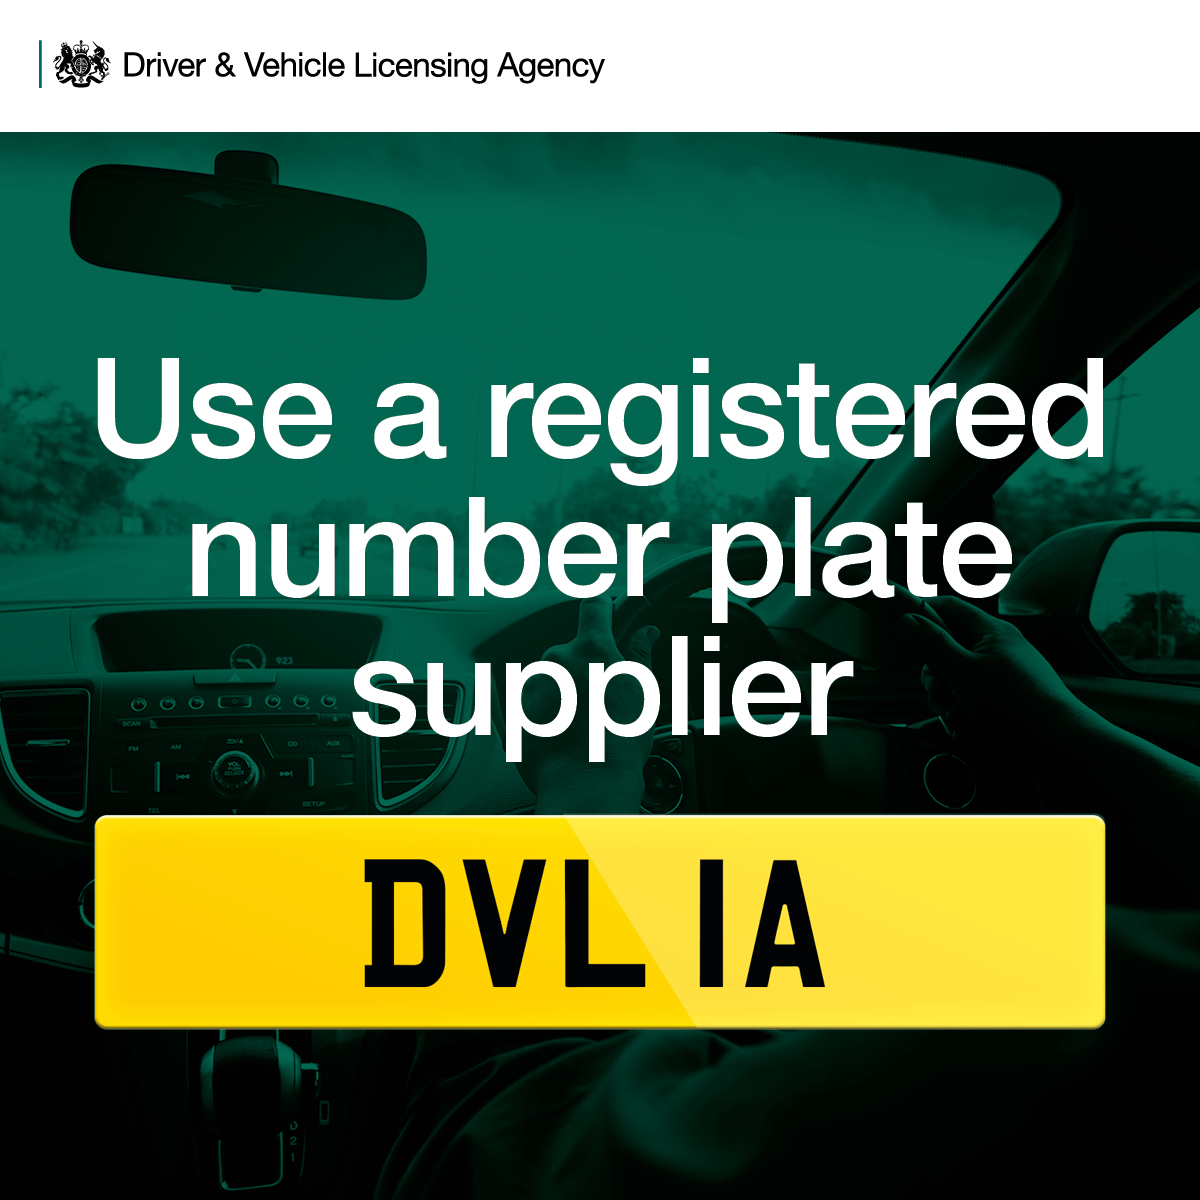 If you need to get a number plate made up, make sure you get one from a registered number plate supplier 👉 gov.uk/number-plate-s… You’ll be asked for original documents that prove your identity and show you’re entitled to the registration number.